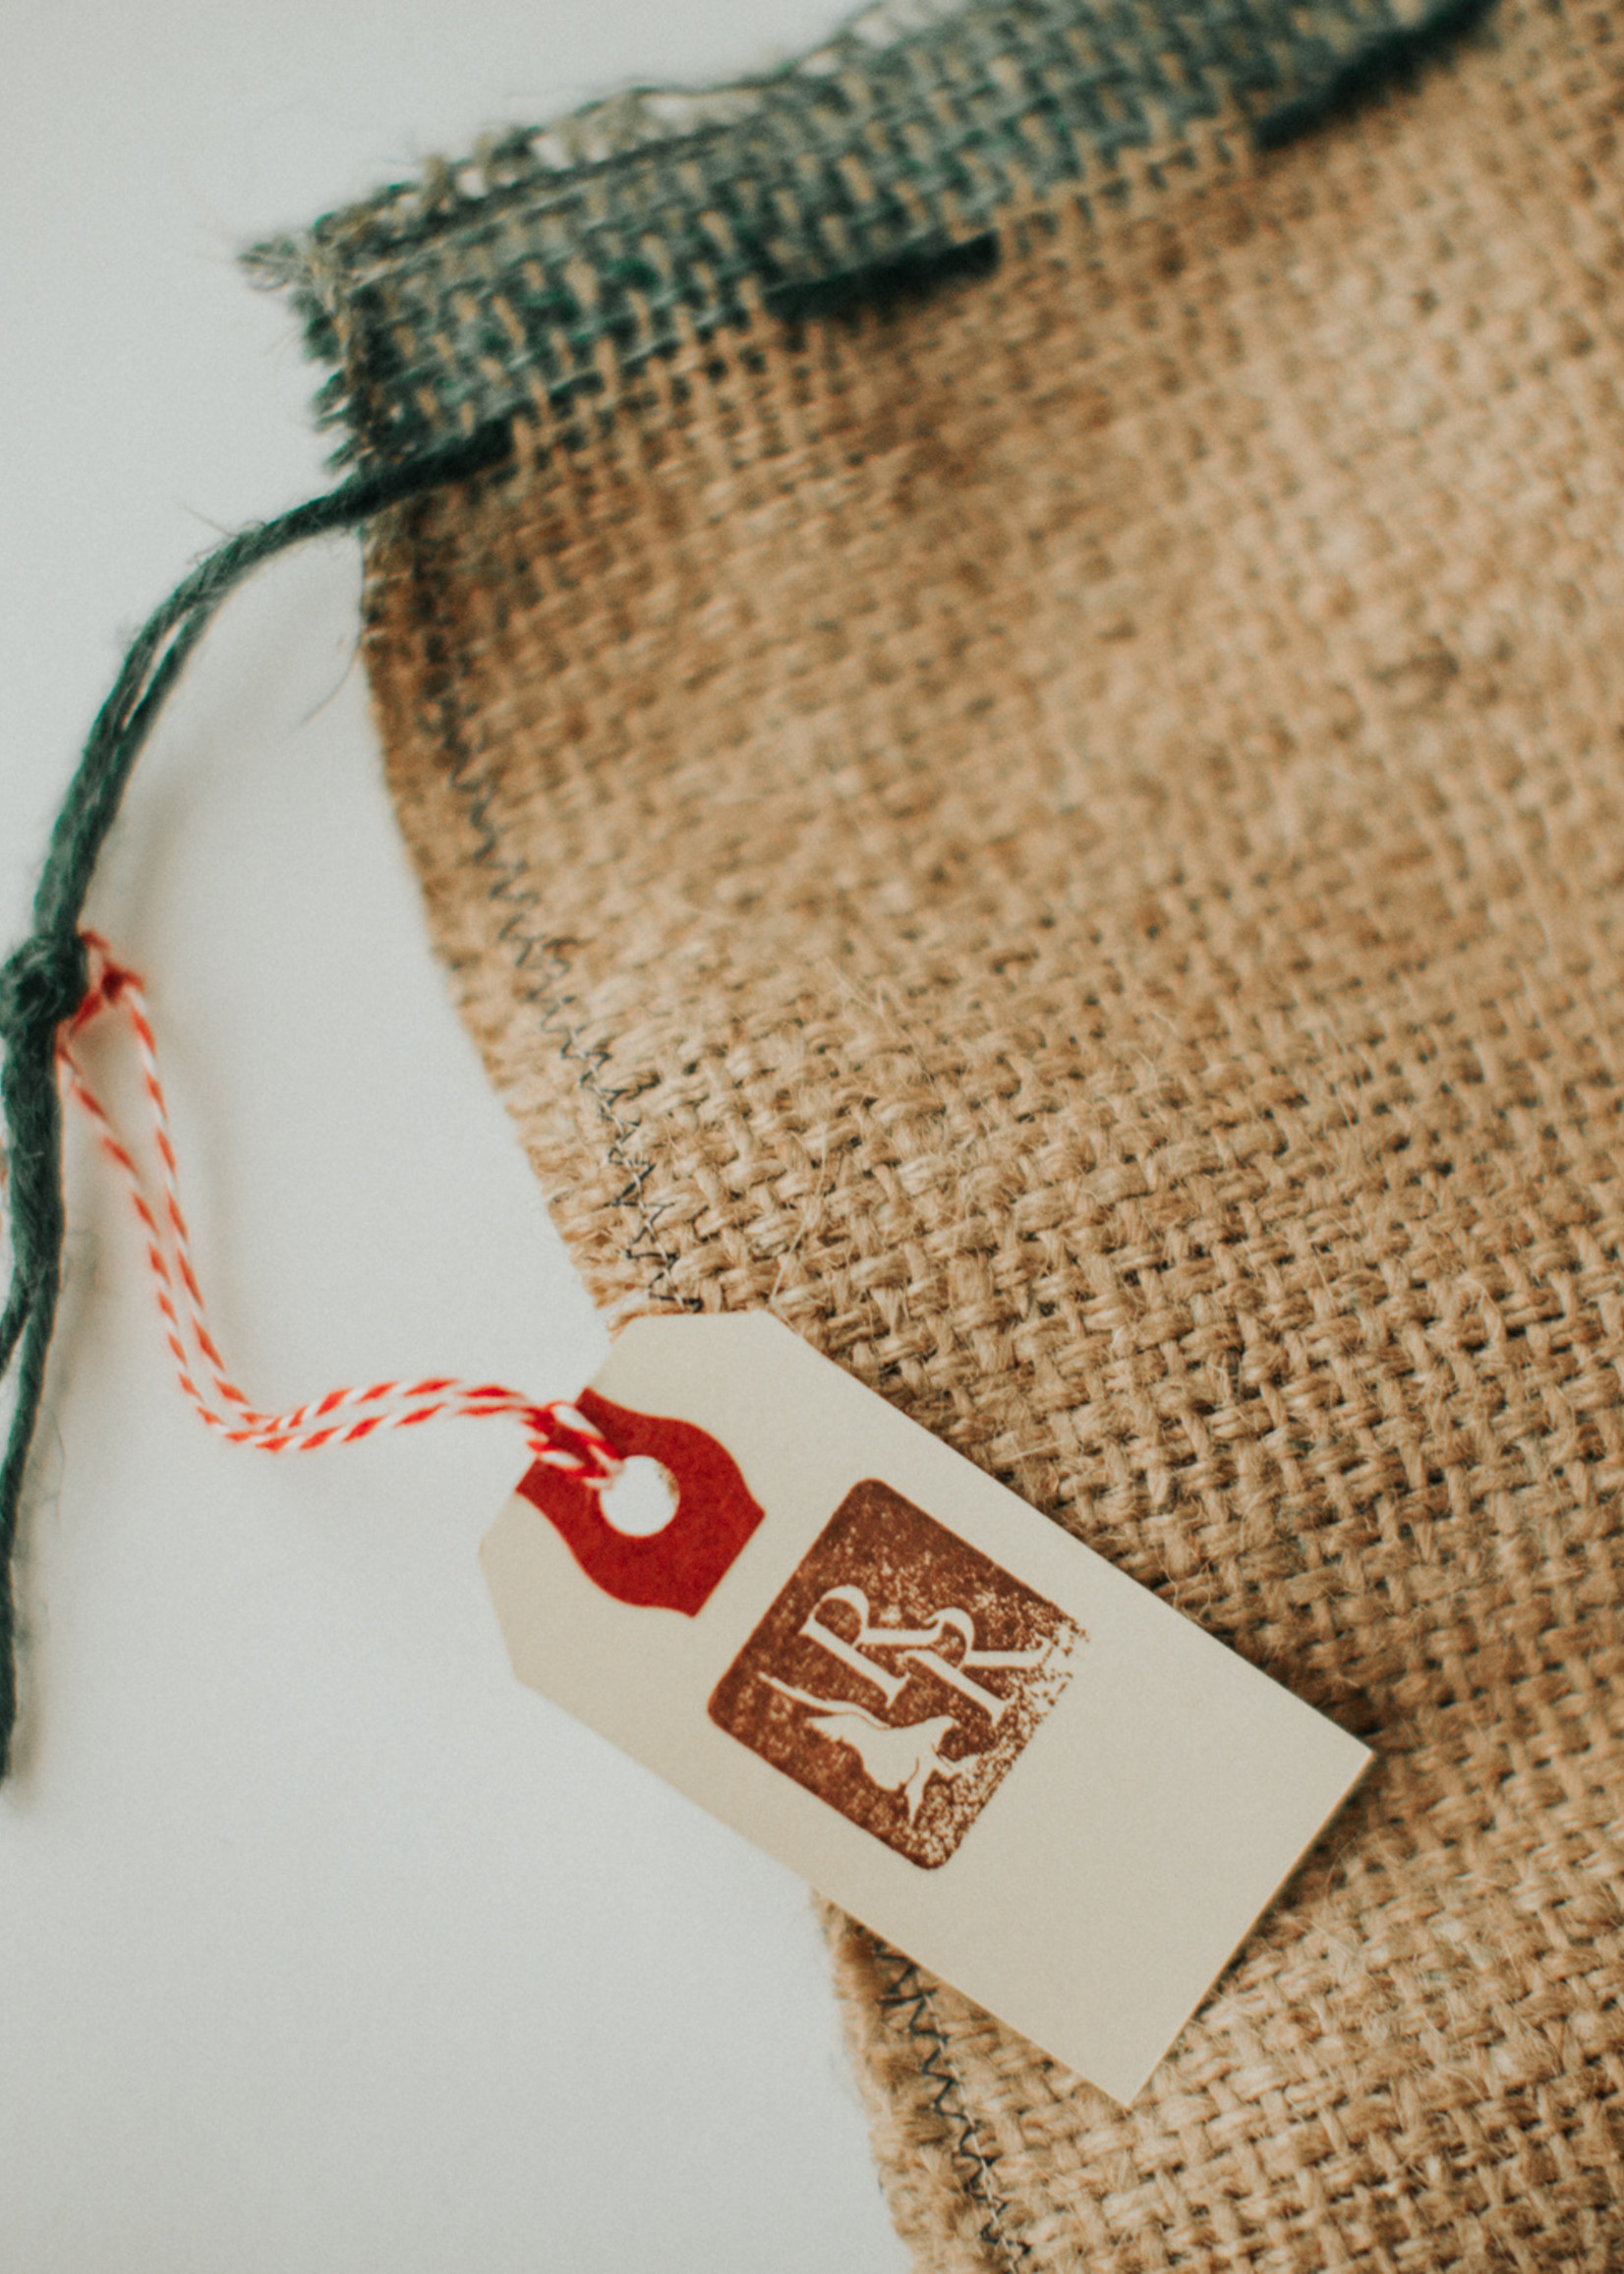 Up-cycled burlap gift bags